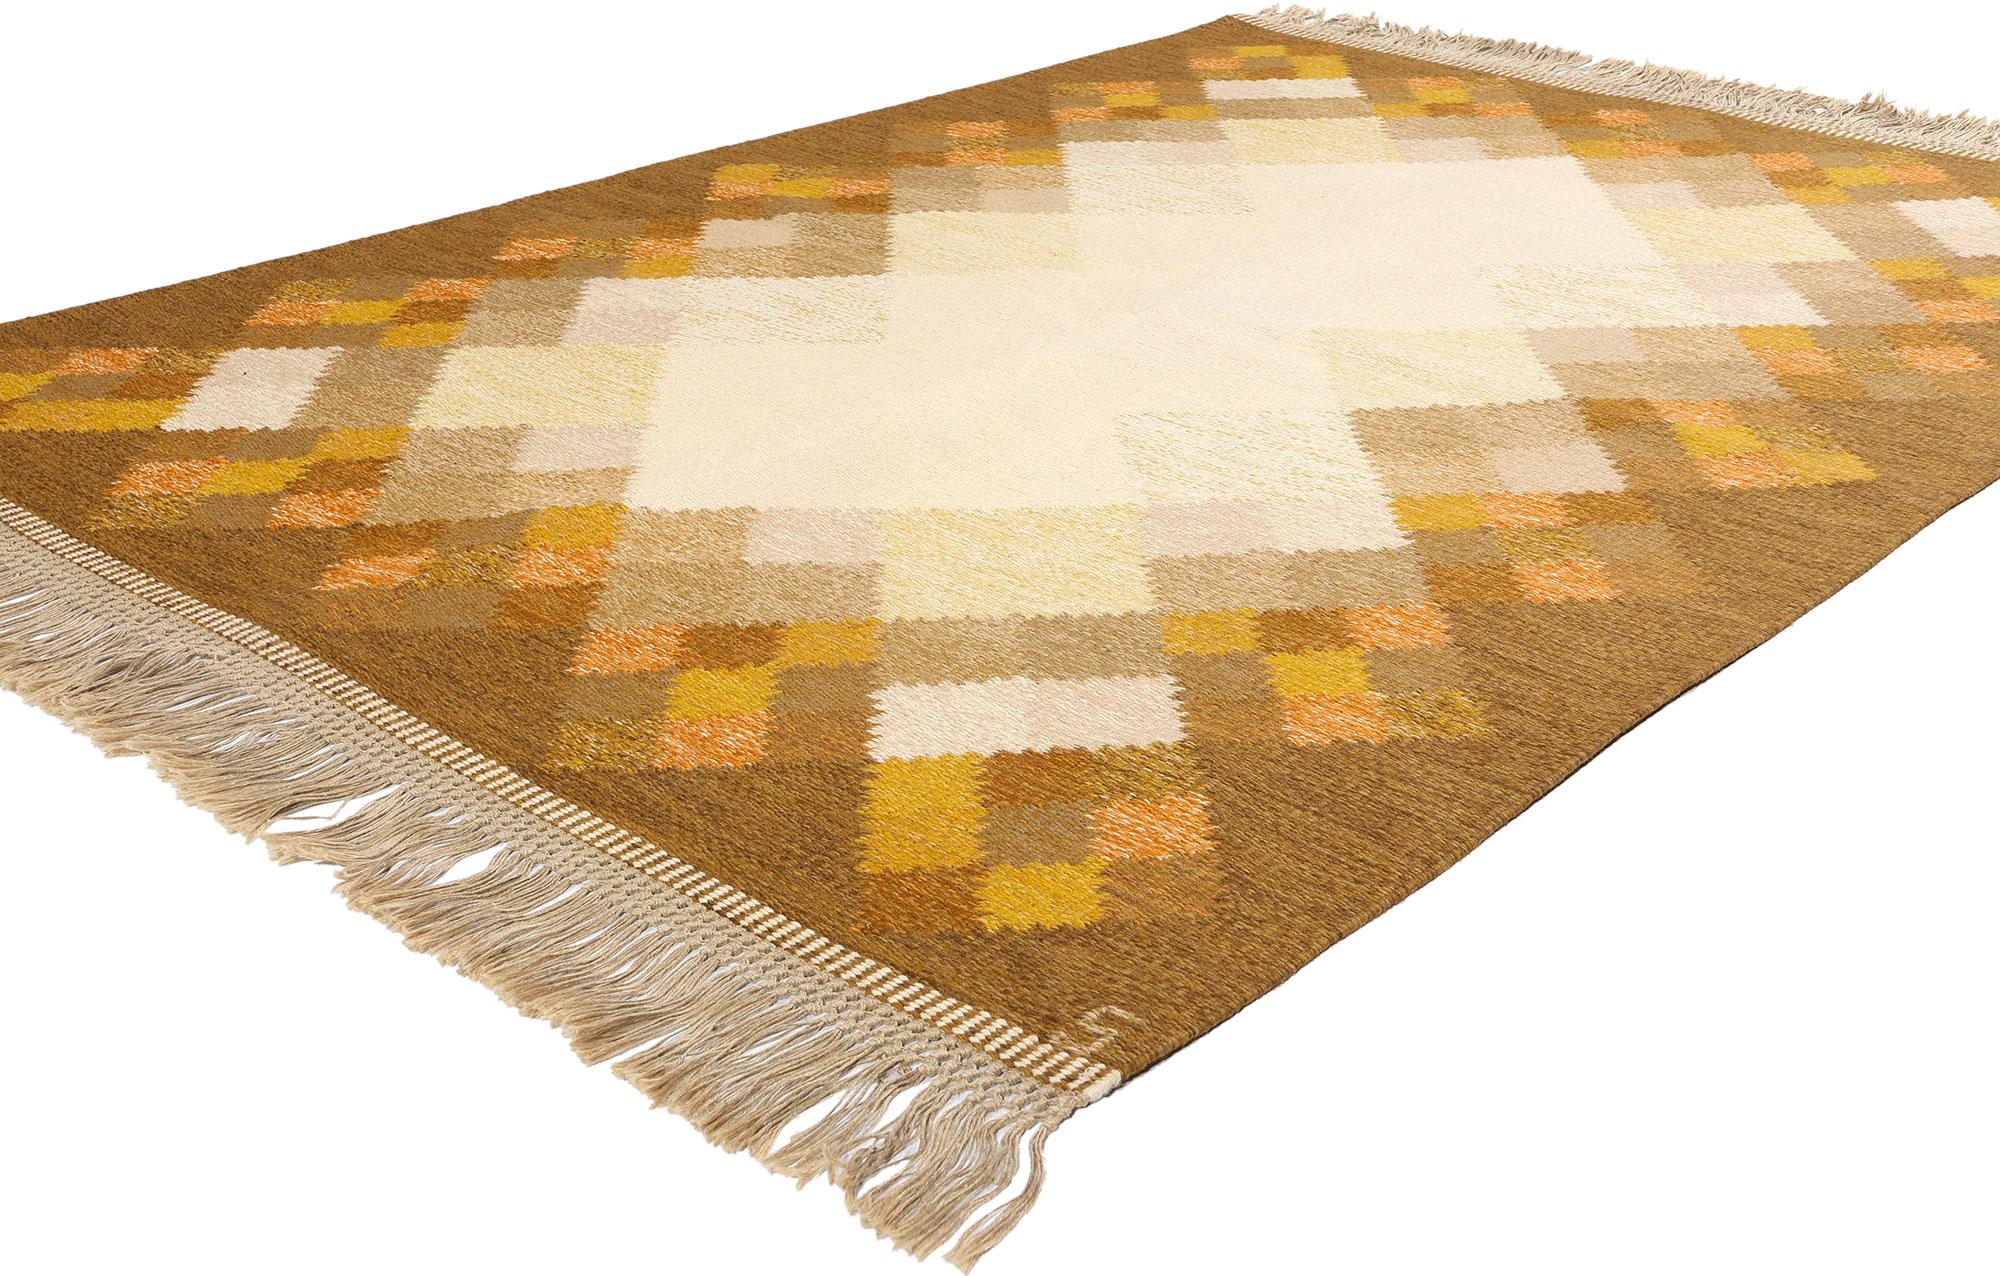 78259 Brita Svefors Vintage Swedish Kilim Rollakan Rug, 5'06 x 7'07. Originating from Sweden, Brita Svefors's Swedish Rollakan rugs are emblematic of traditional flat-woven craftsmanship, celebrated for their vivid colors and intricate geometric